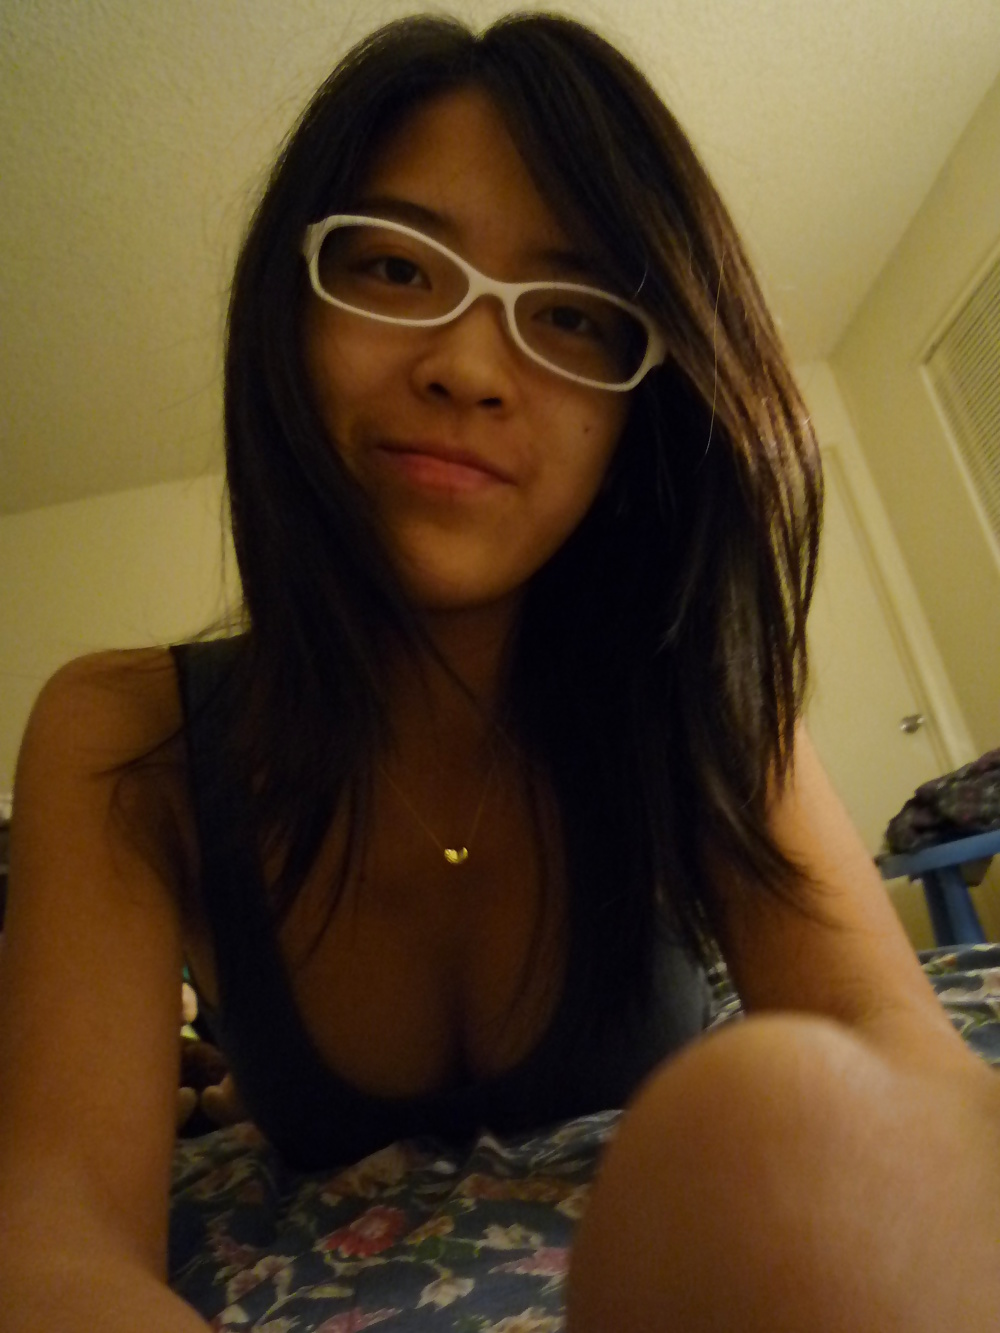 Sexy asian teen with glasses #30188339